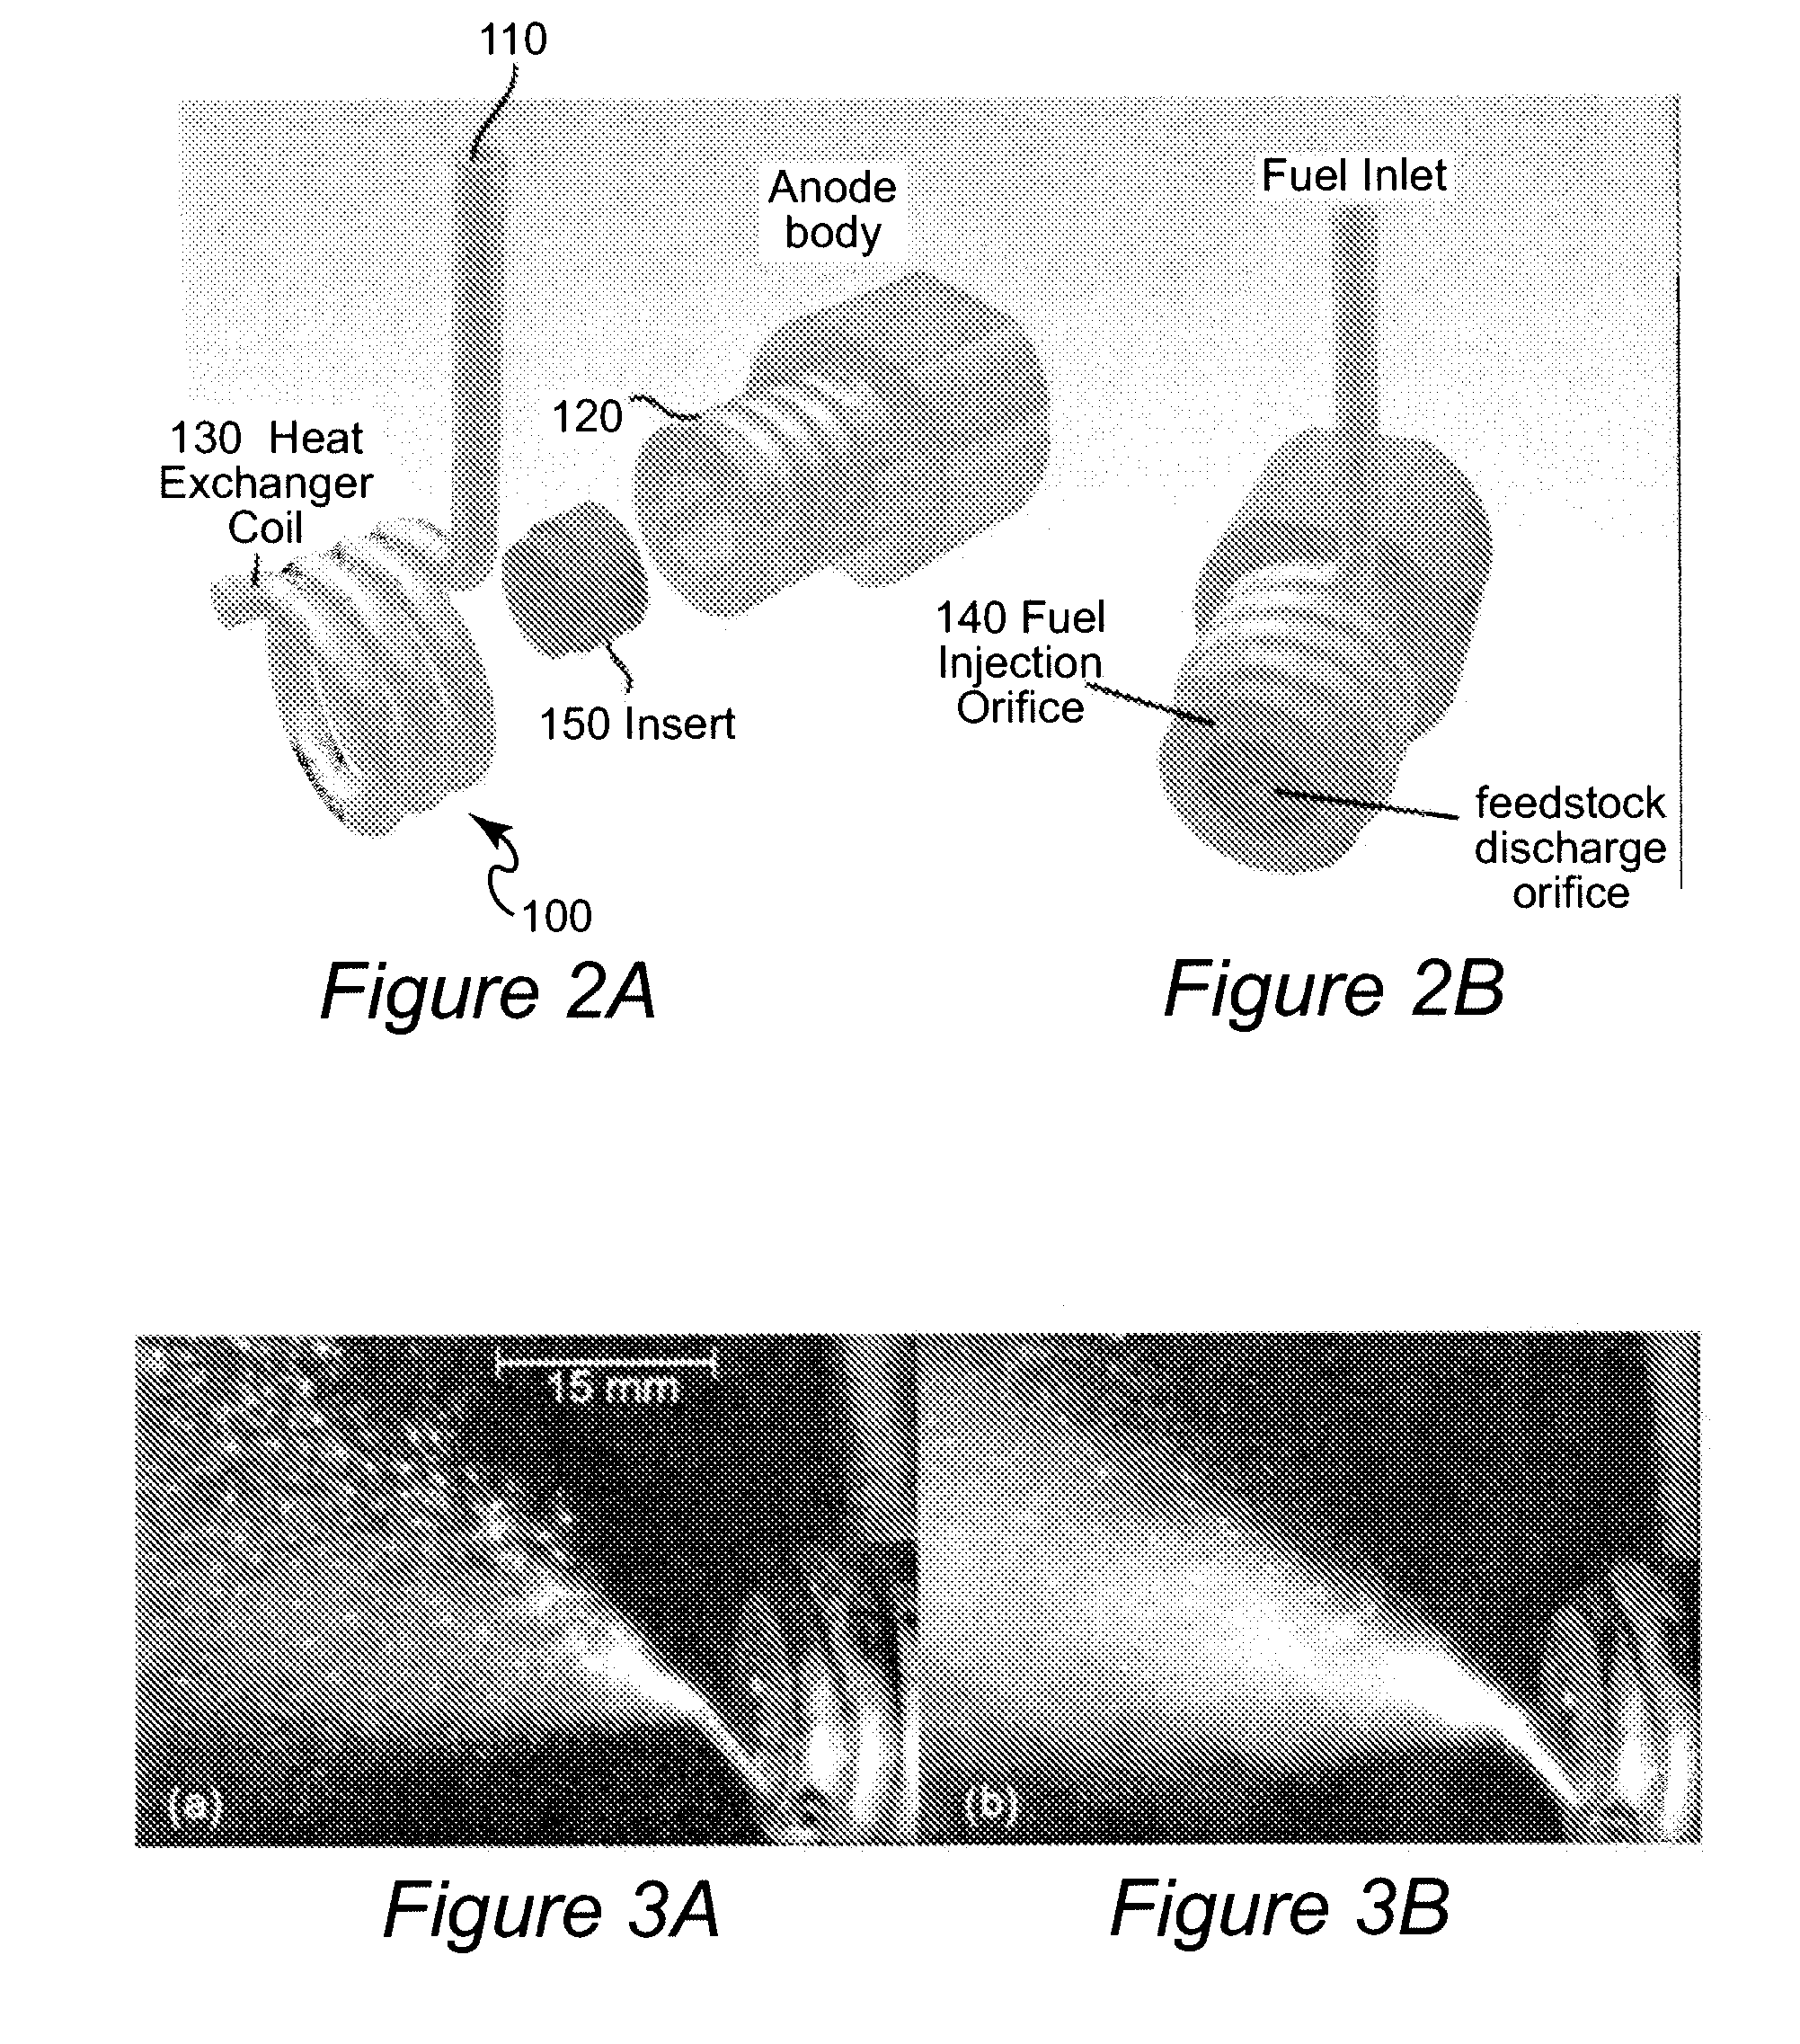 Improved Plasma Torch for Ignition, Flameholding and Enhancement of Combustion in High Speed Flows